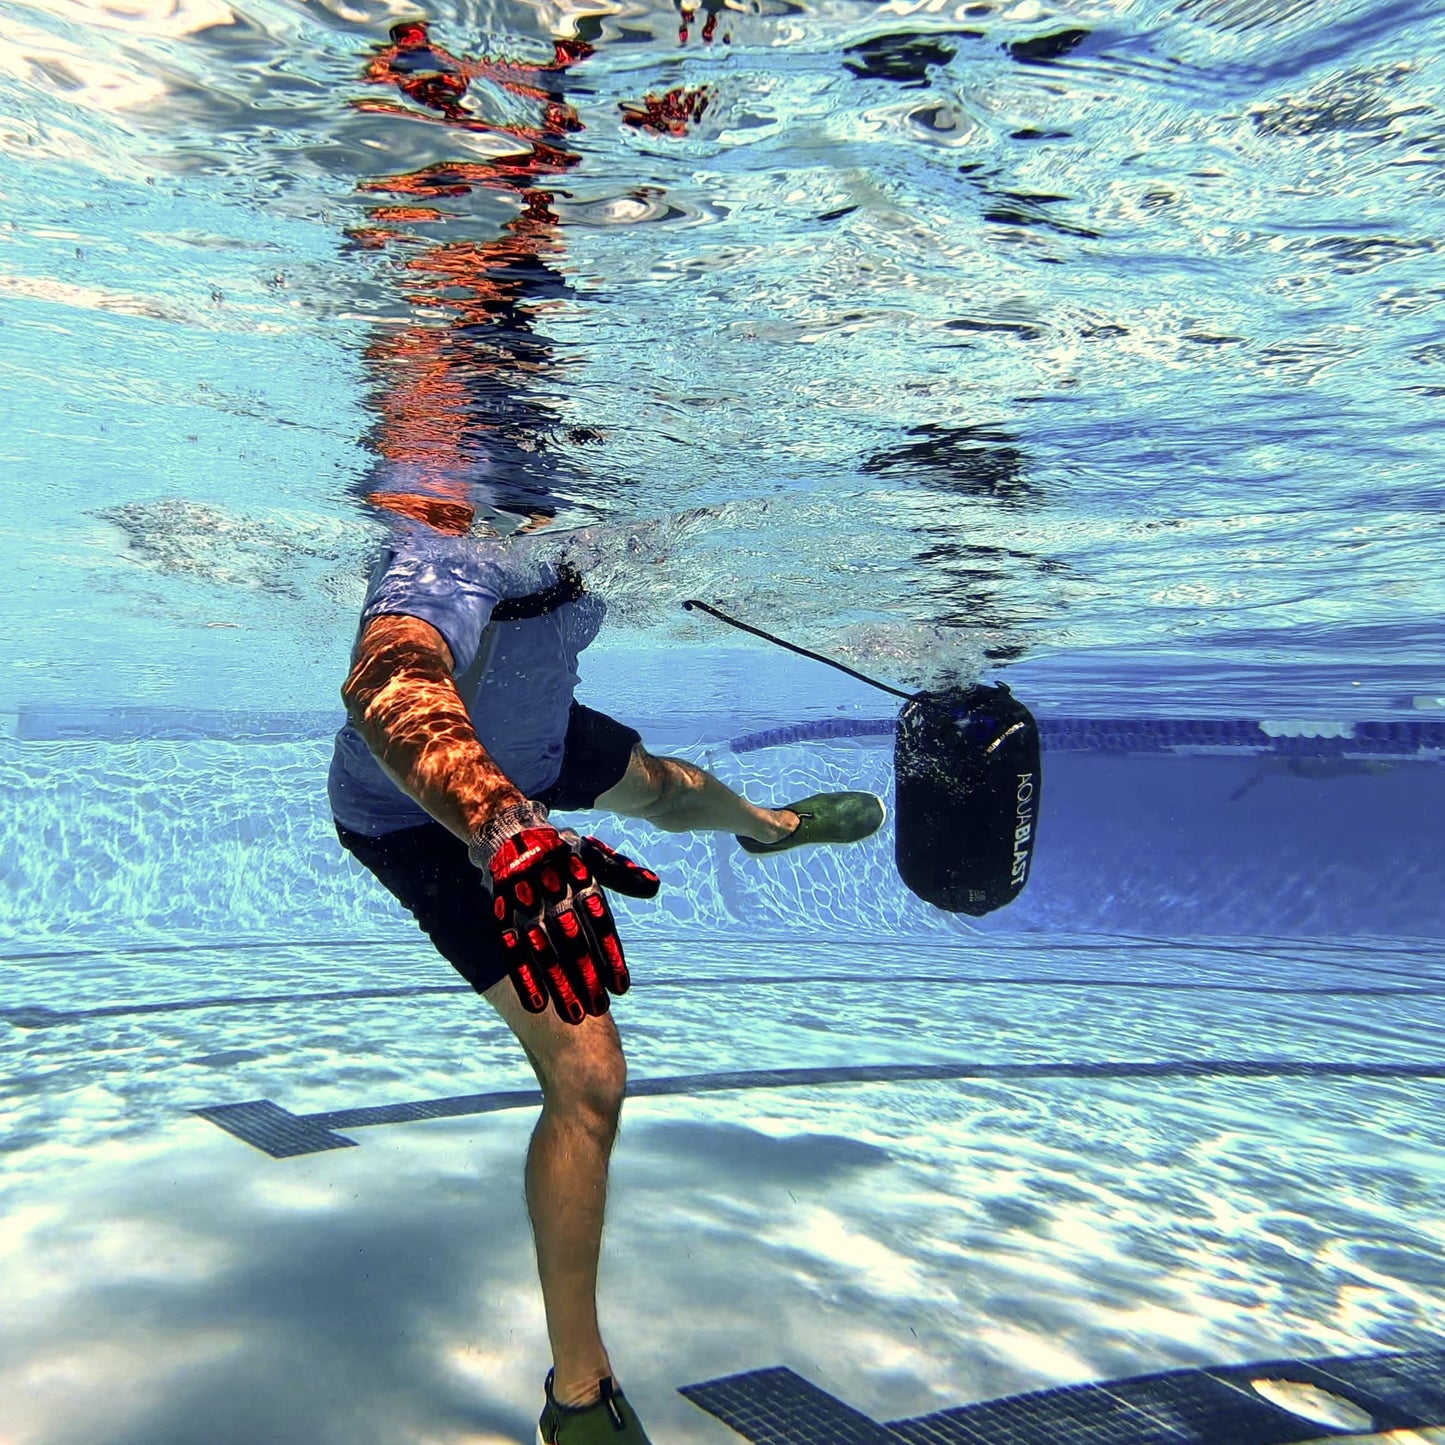 AquaBLAST Harness - push, punch and kickboxing in the pool